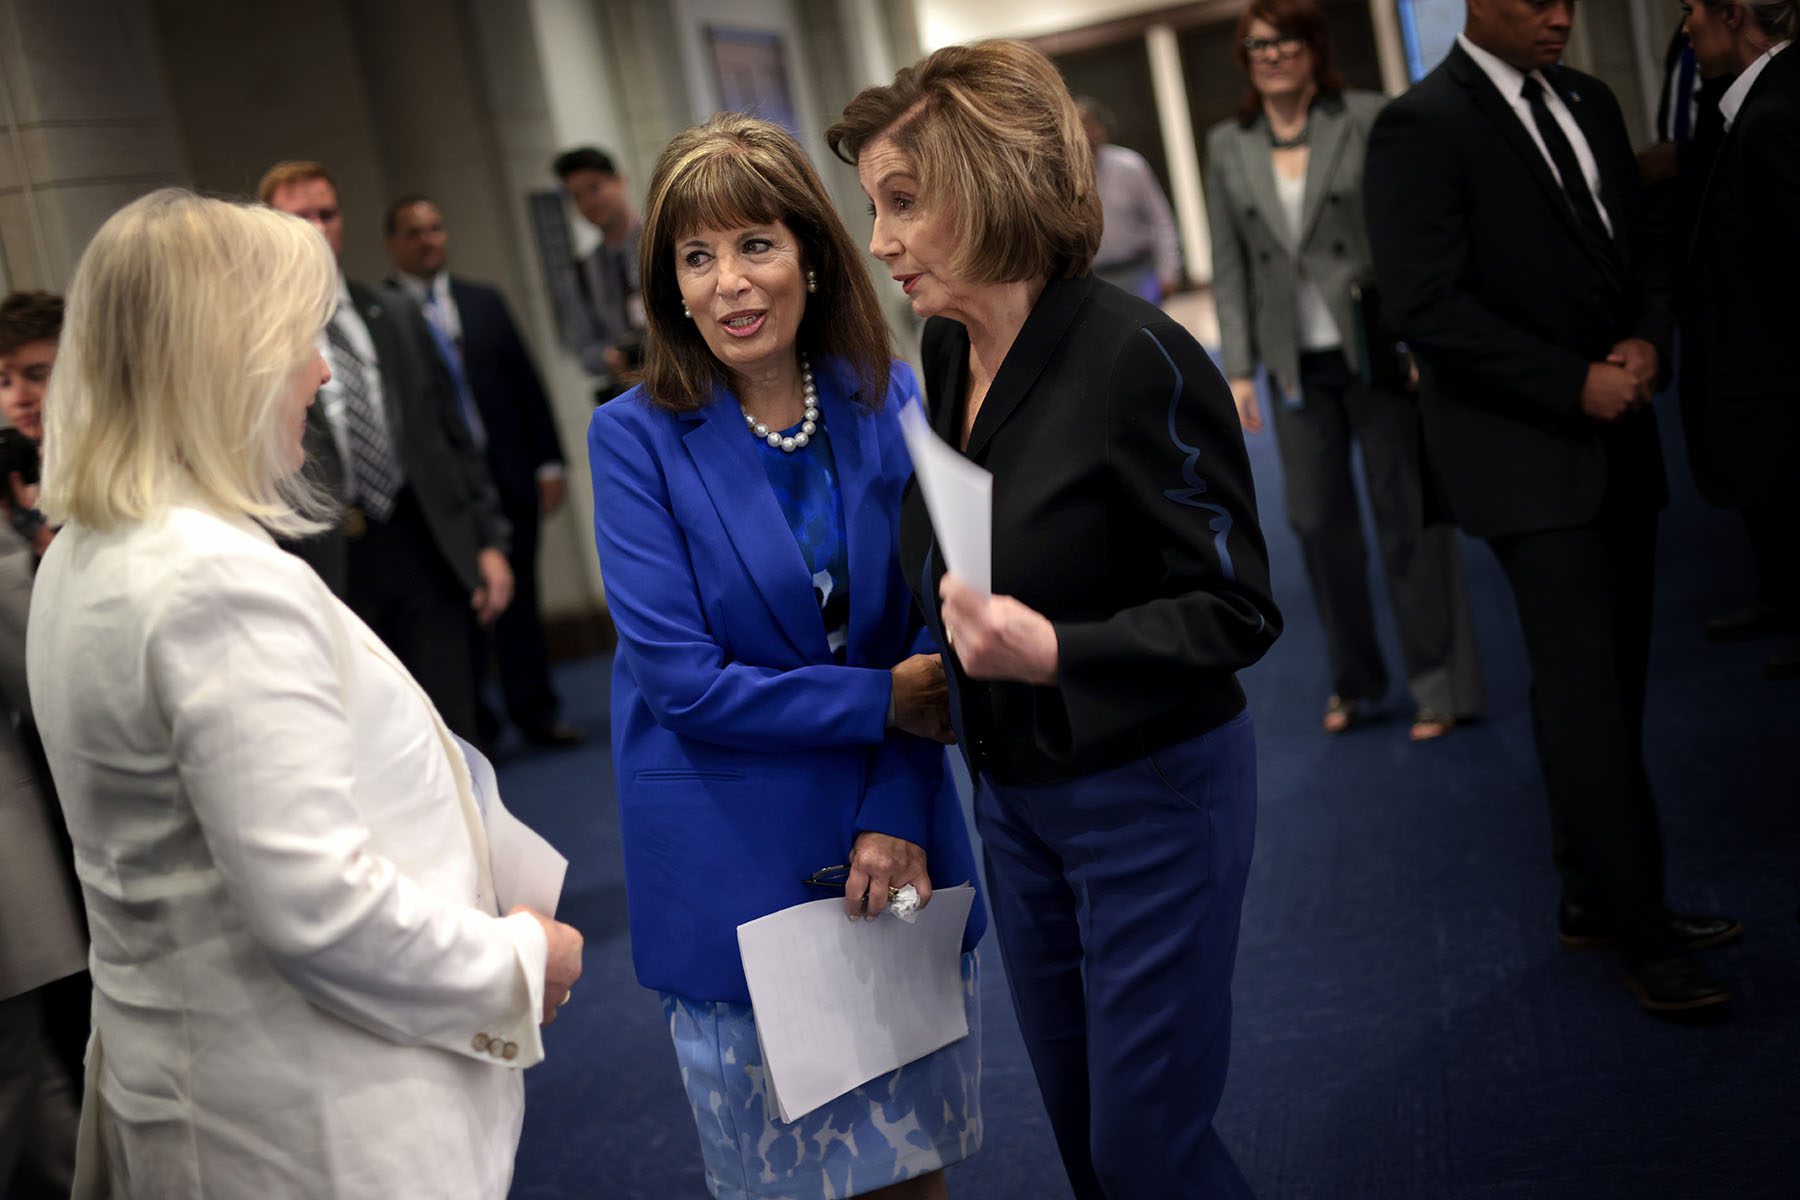 Nancy Pelosi confers with Rep. Jackie Speier and Sen. Kirsten Gillibrand in a hallway before a press conference.